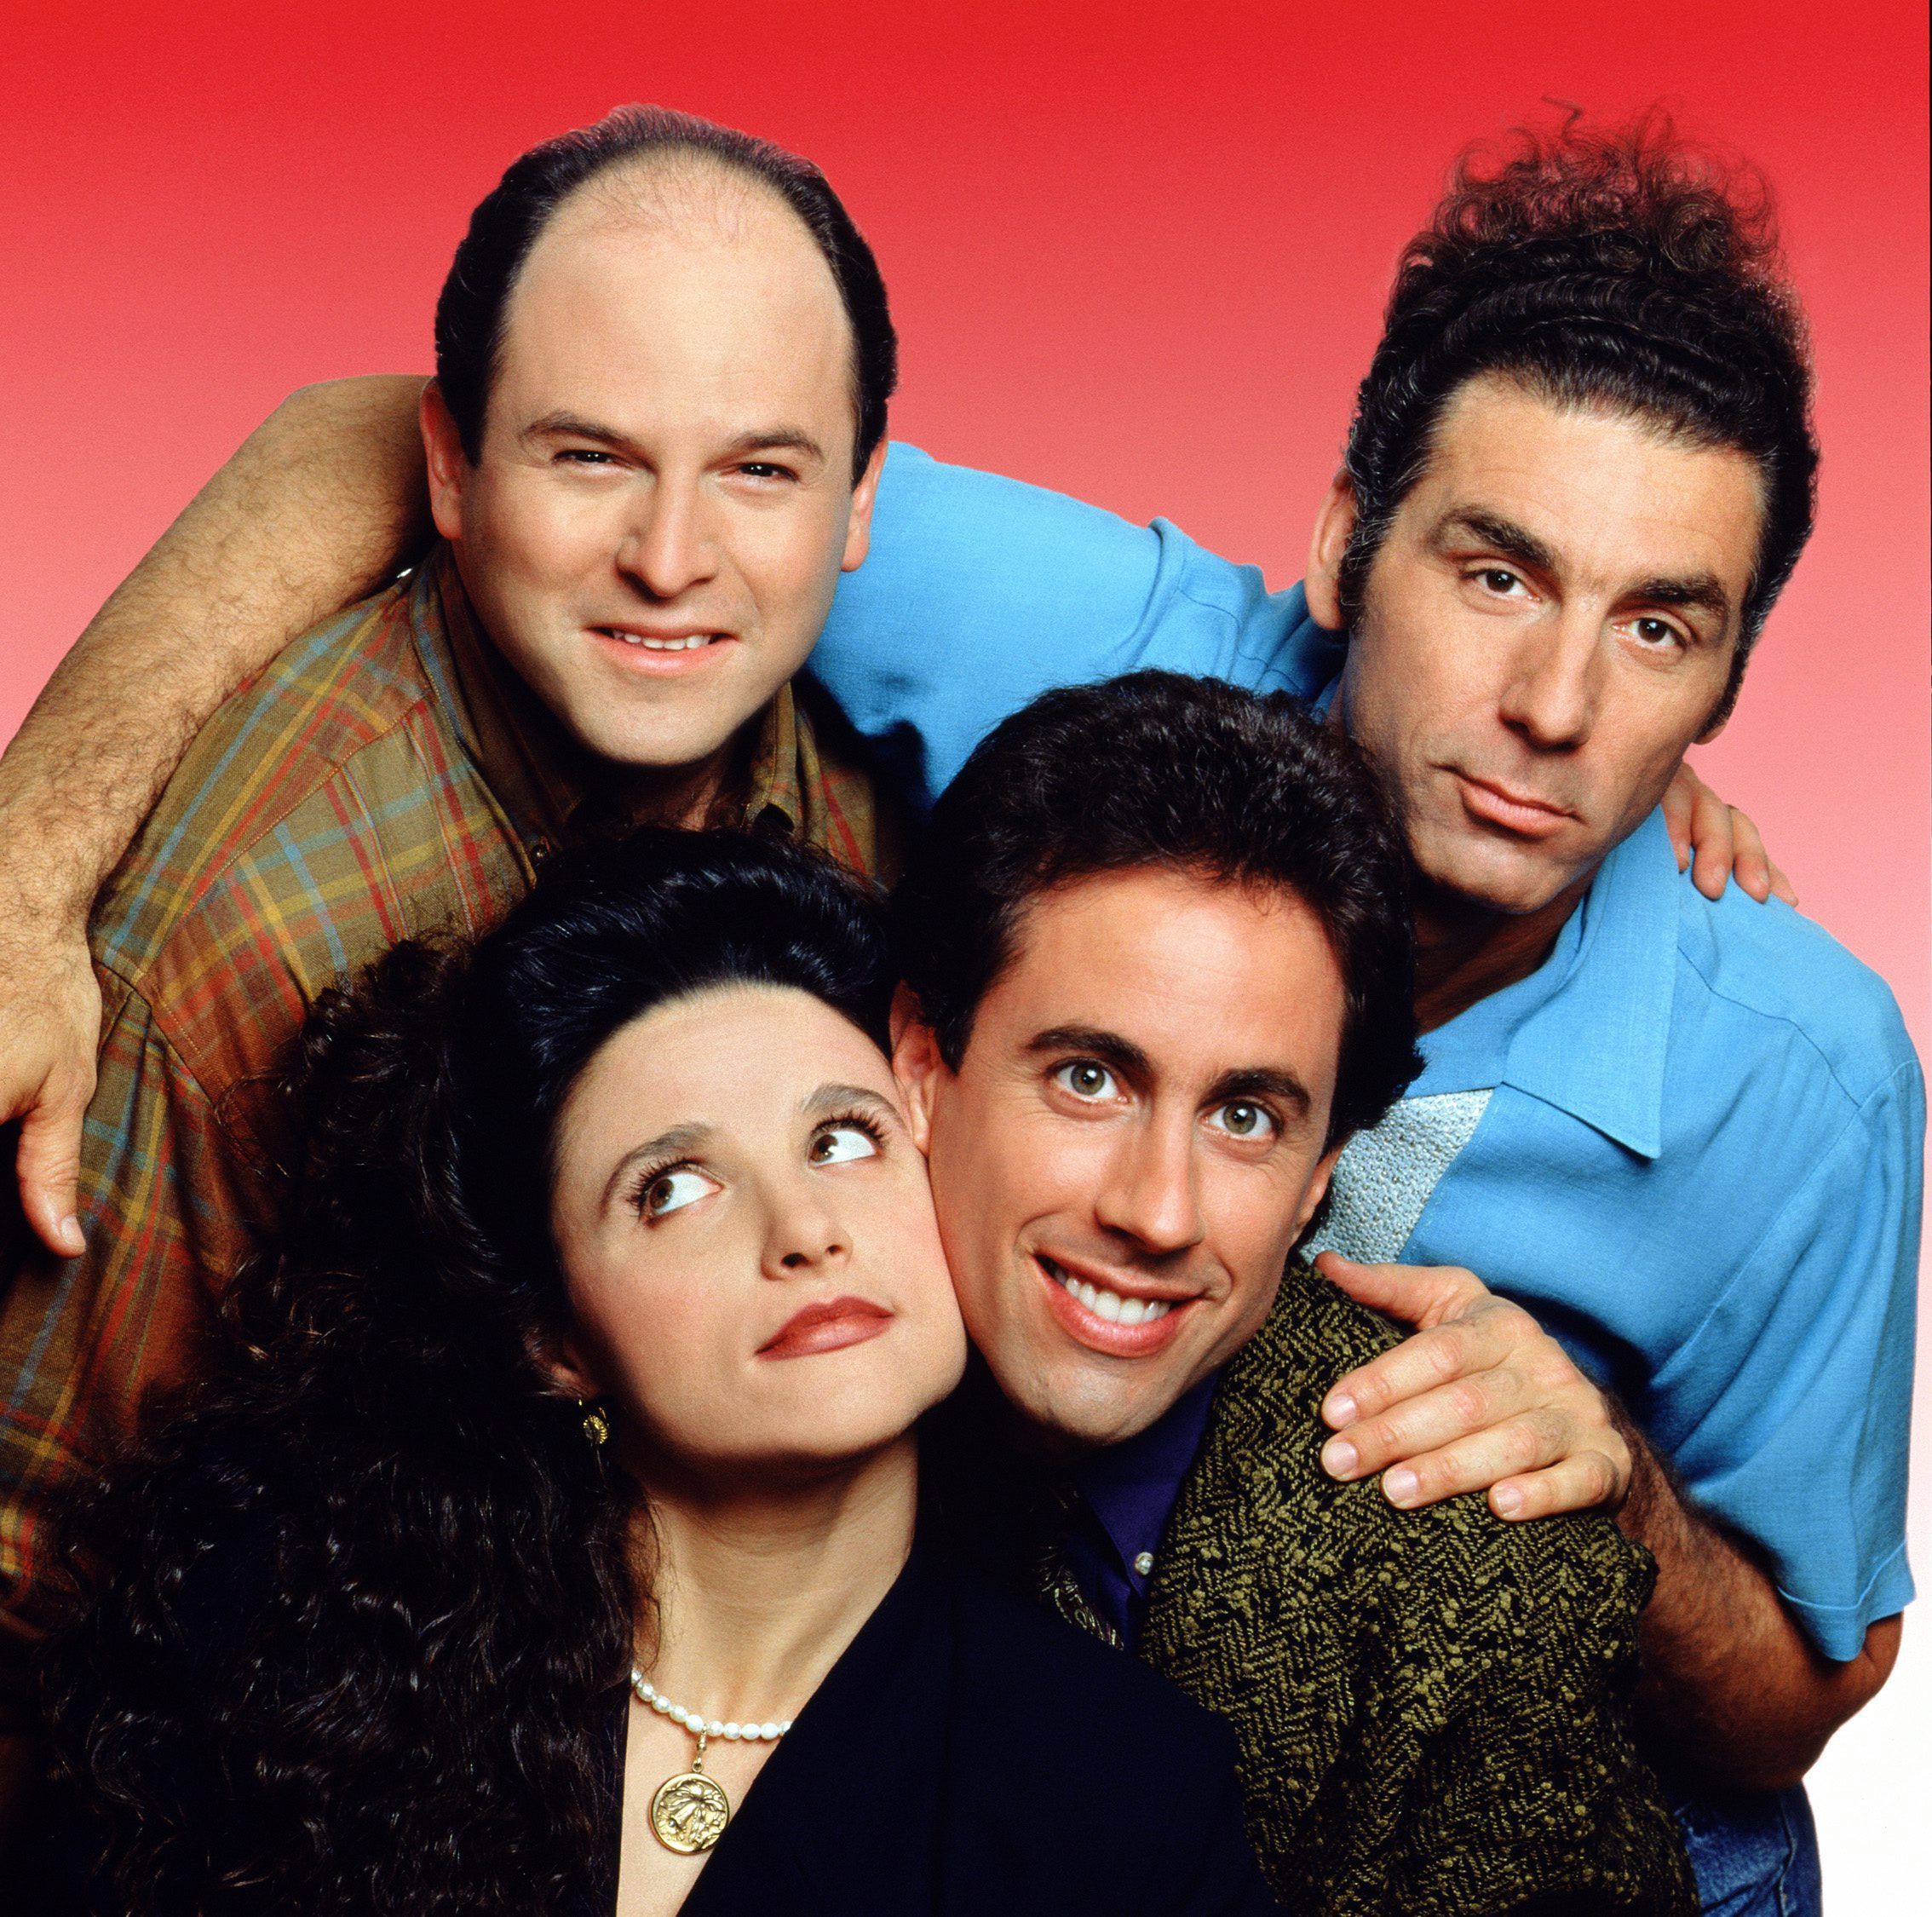 The 10 Most Streamworthy Episodes Of 'Seinfeld' - Page 7 of 11 - Fame10